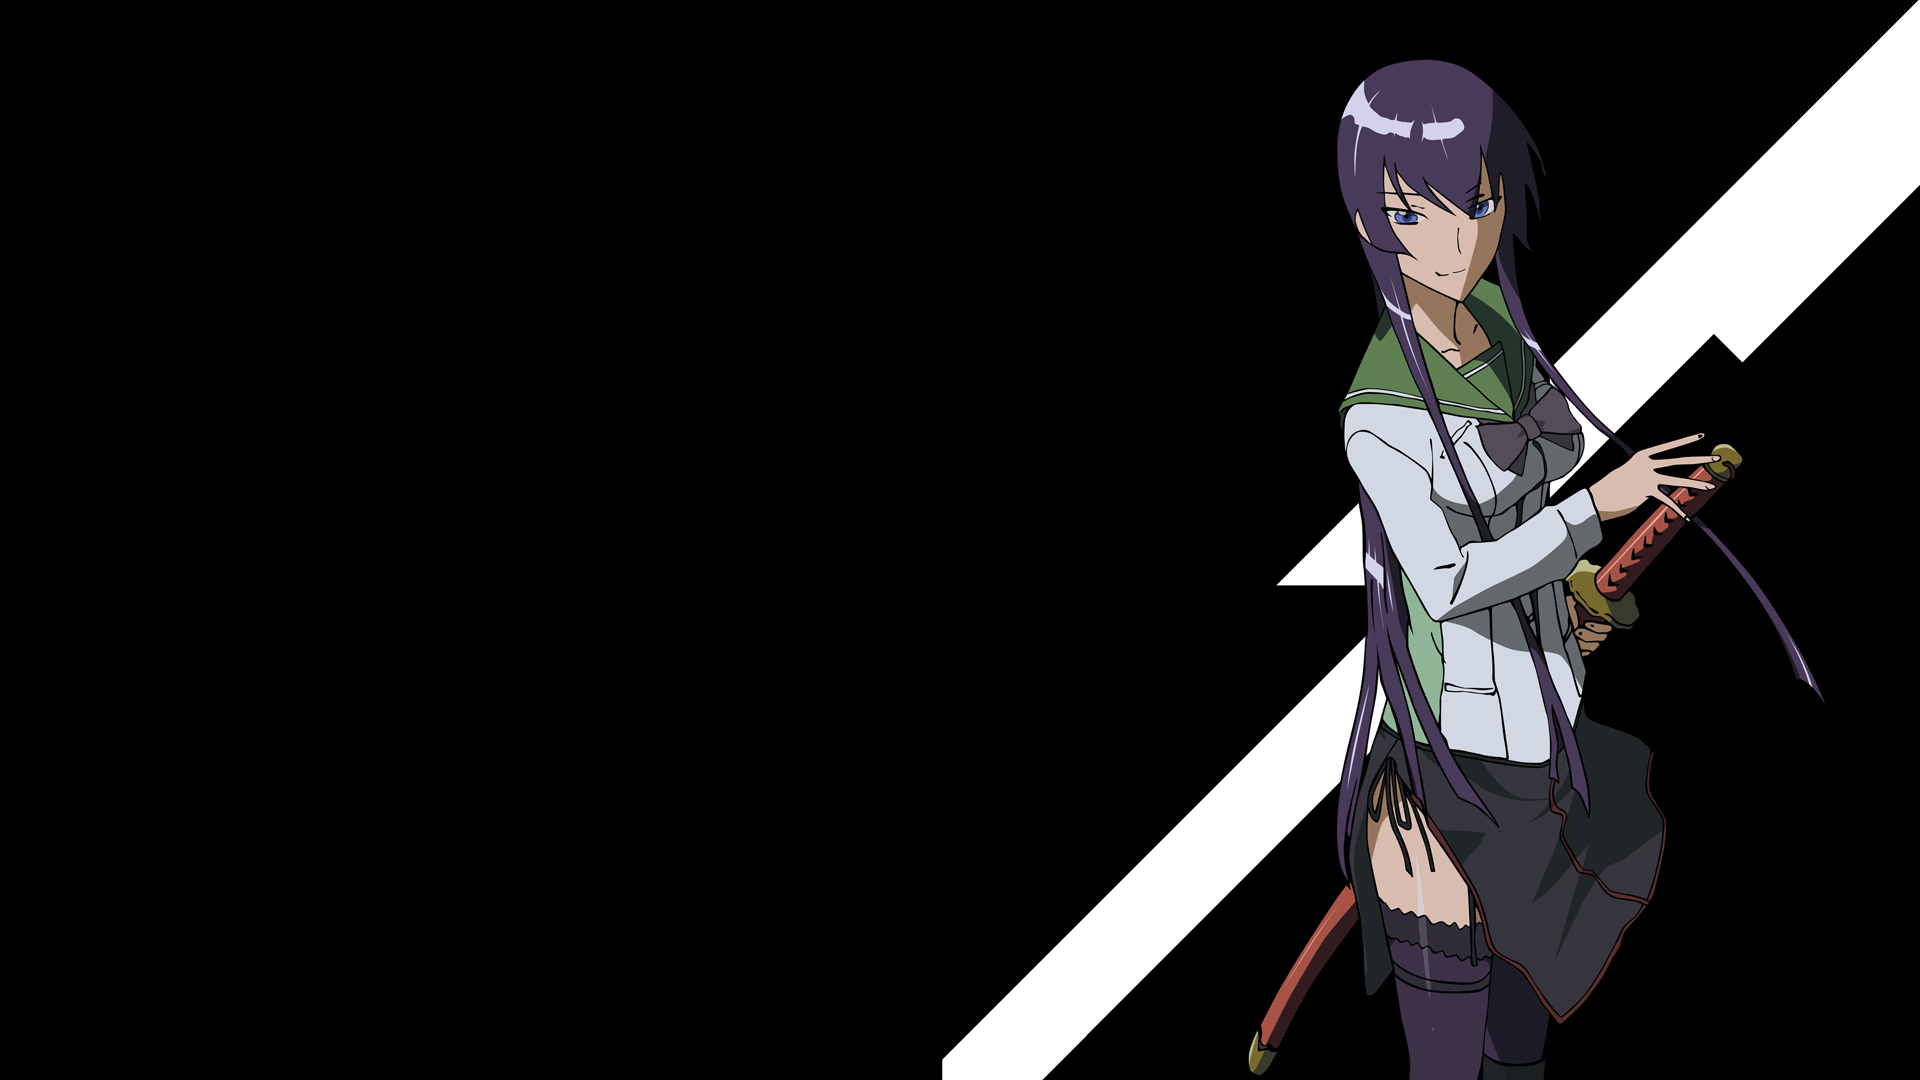 Wallpaper] Characters from High School of the Dead : r/OtakuVisualArts